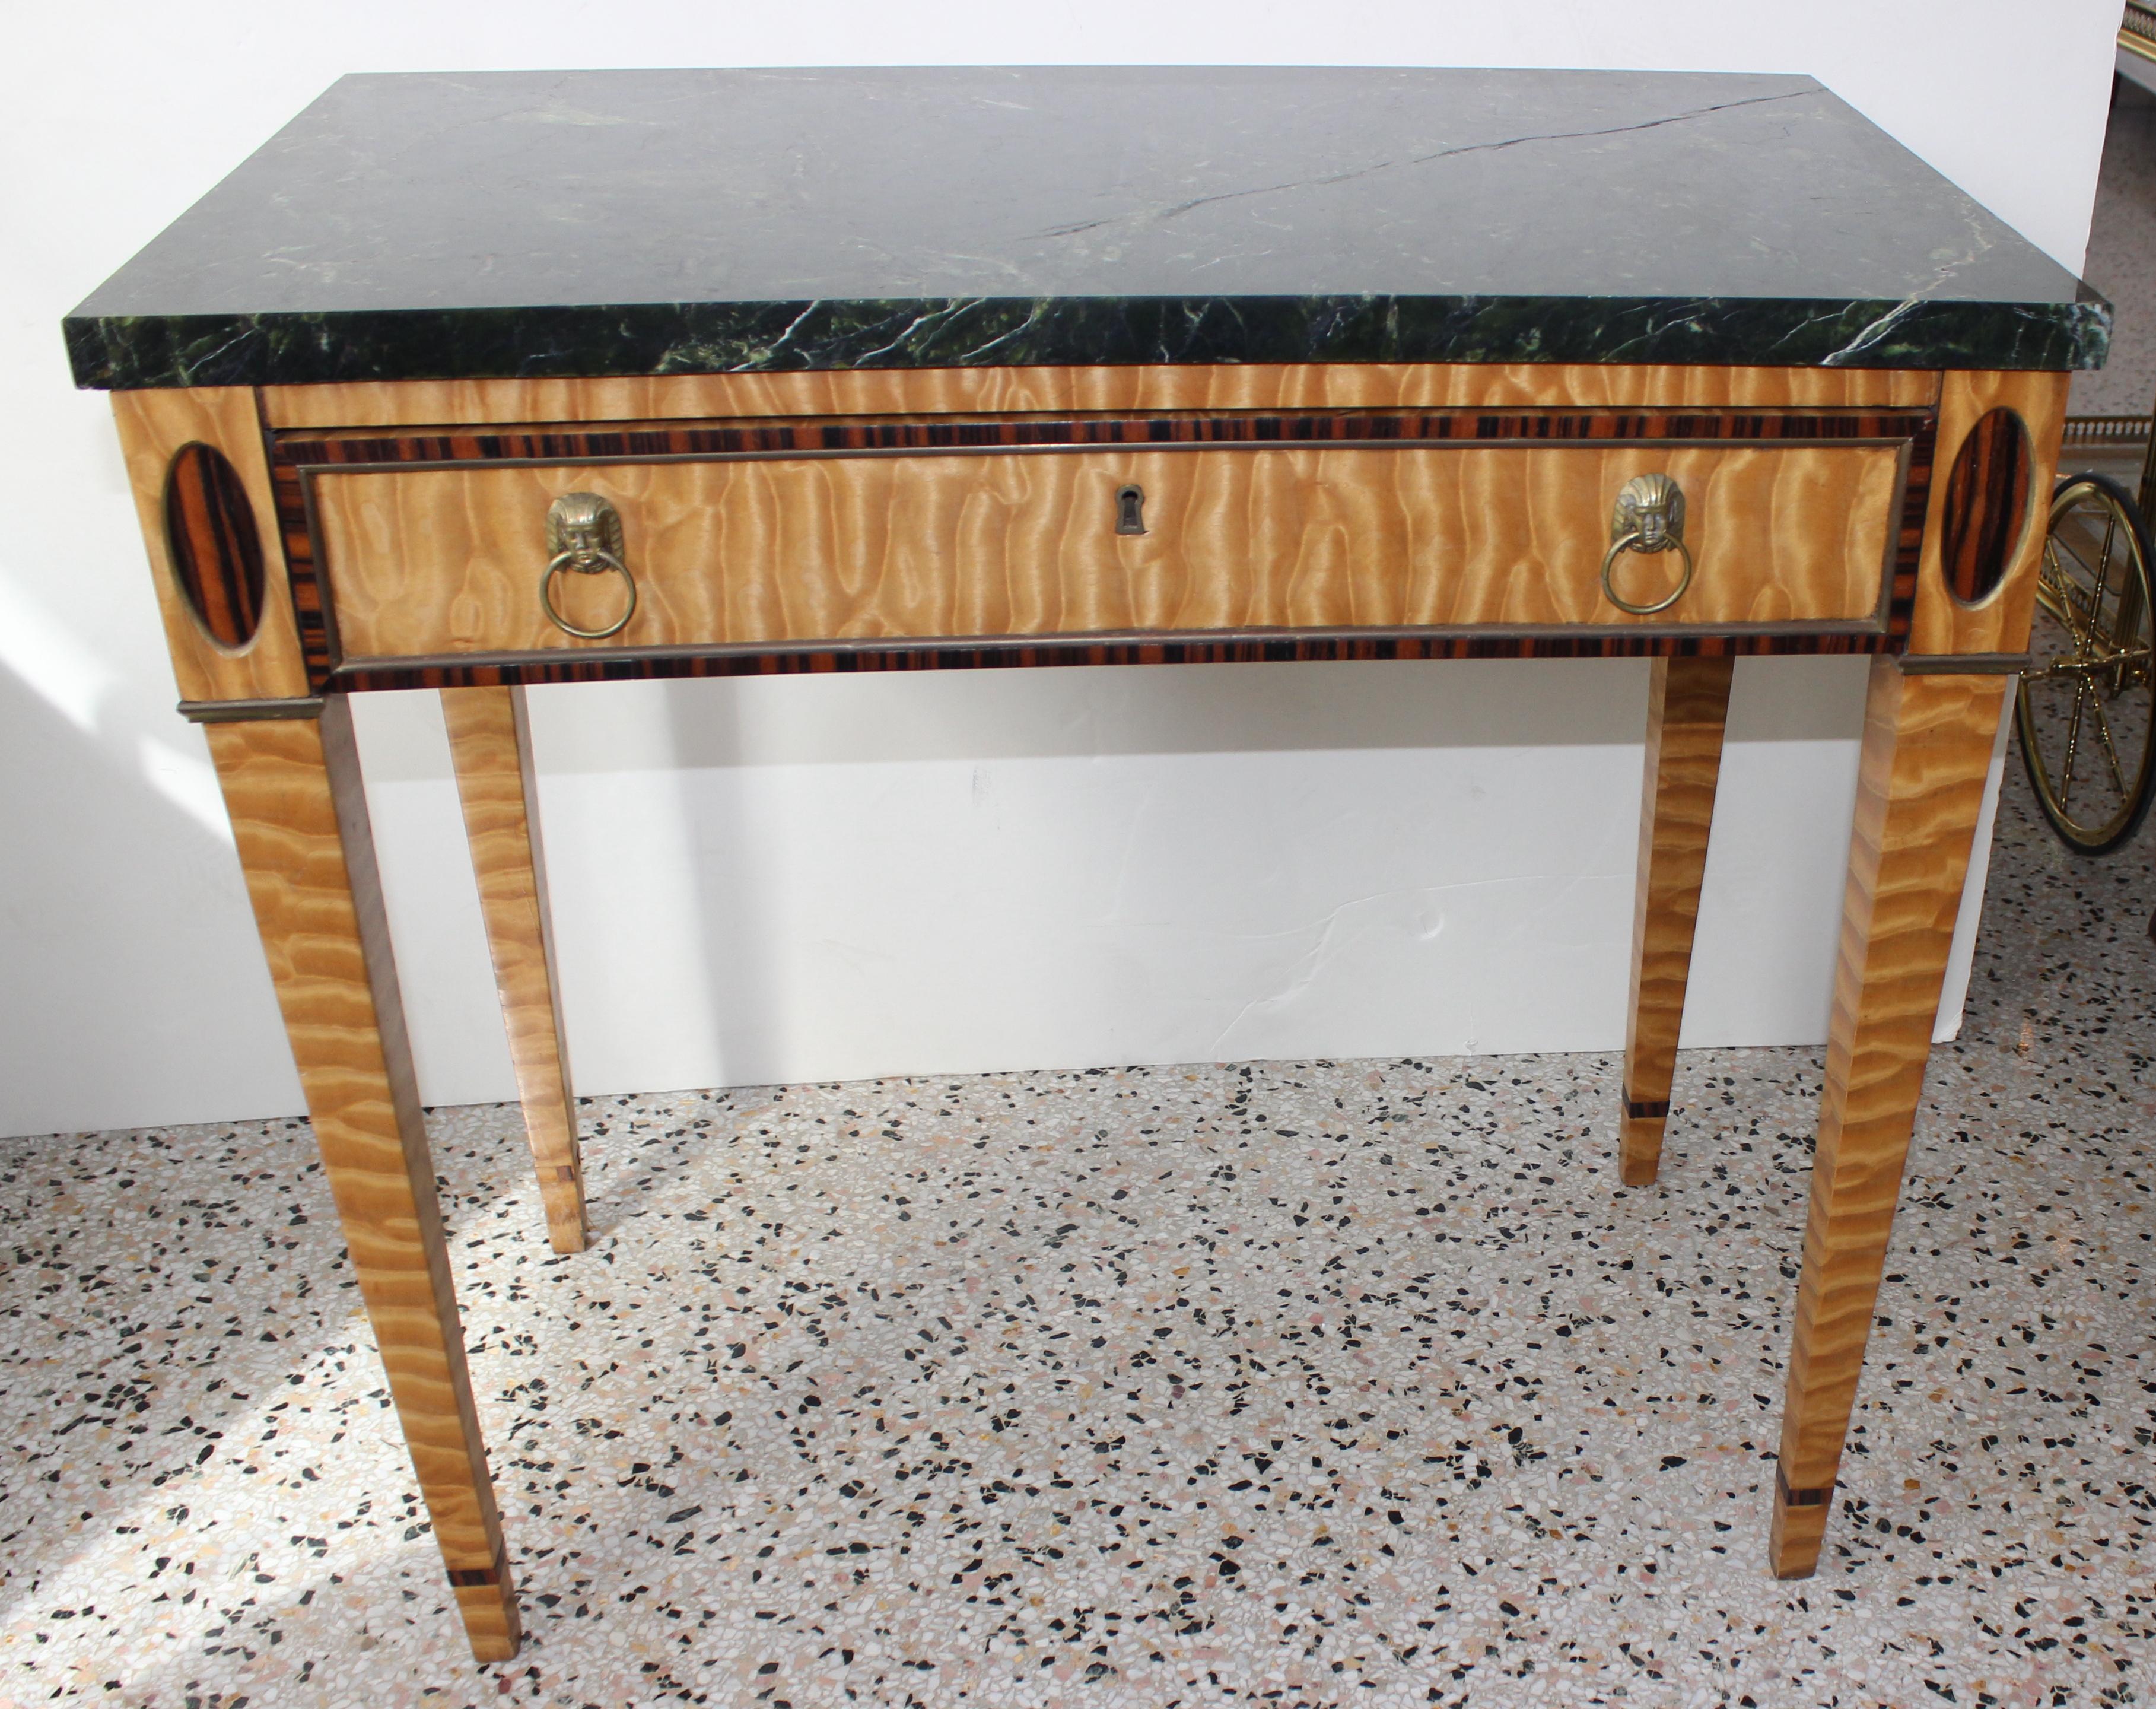 American Classical Mid-19 Century American Side Table in Ribbon Satinwood and Marble